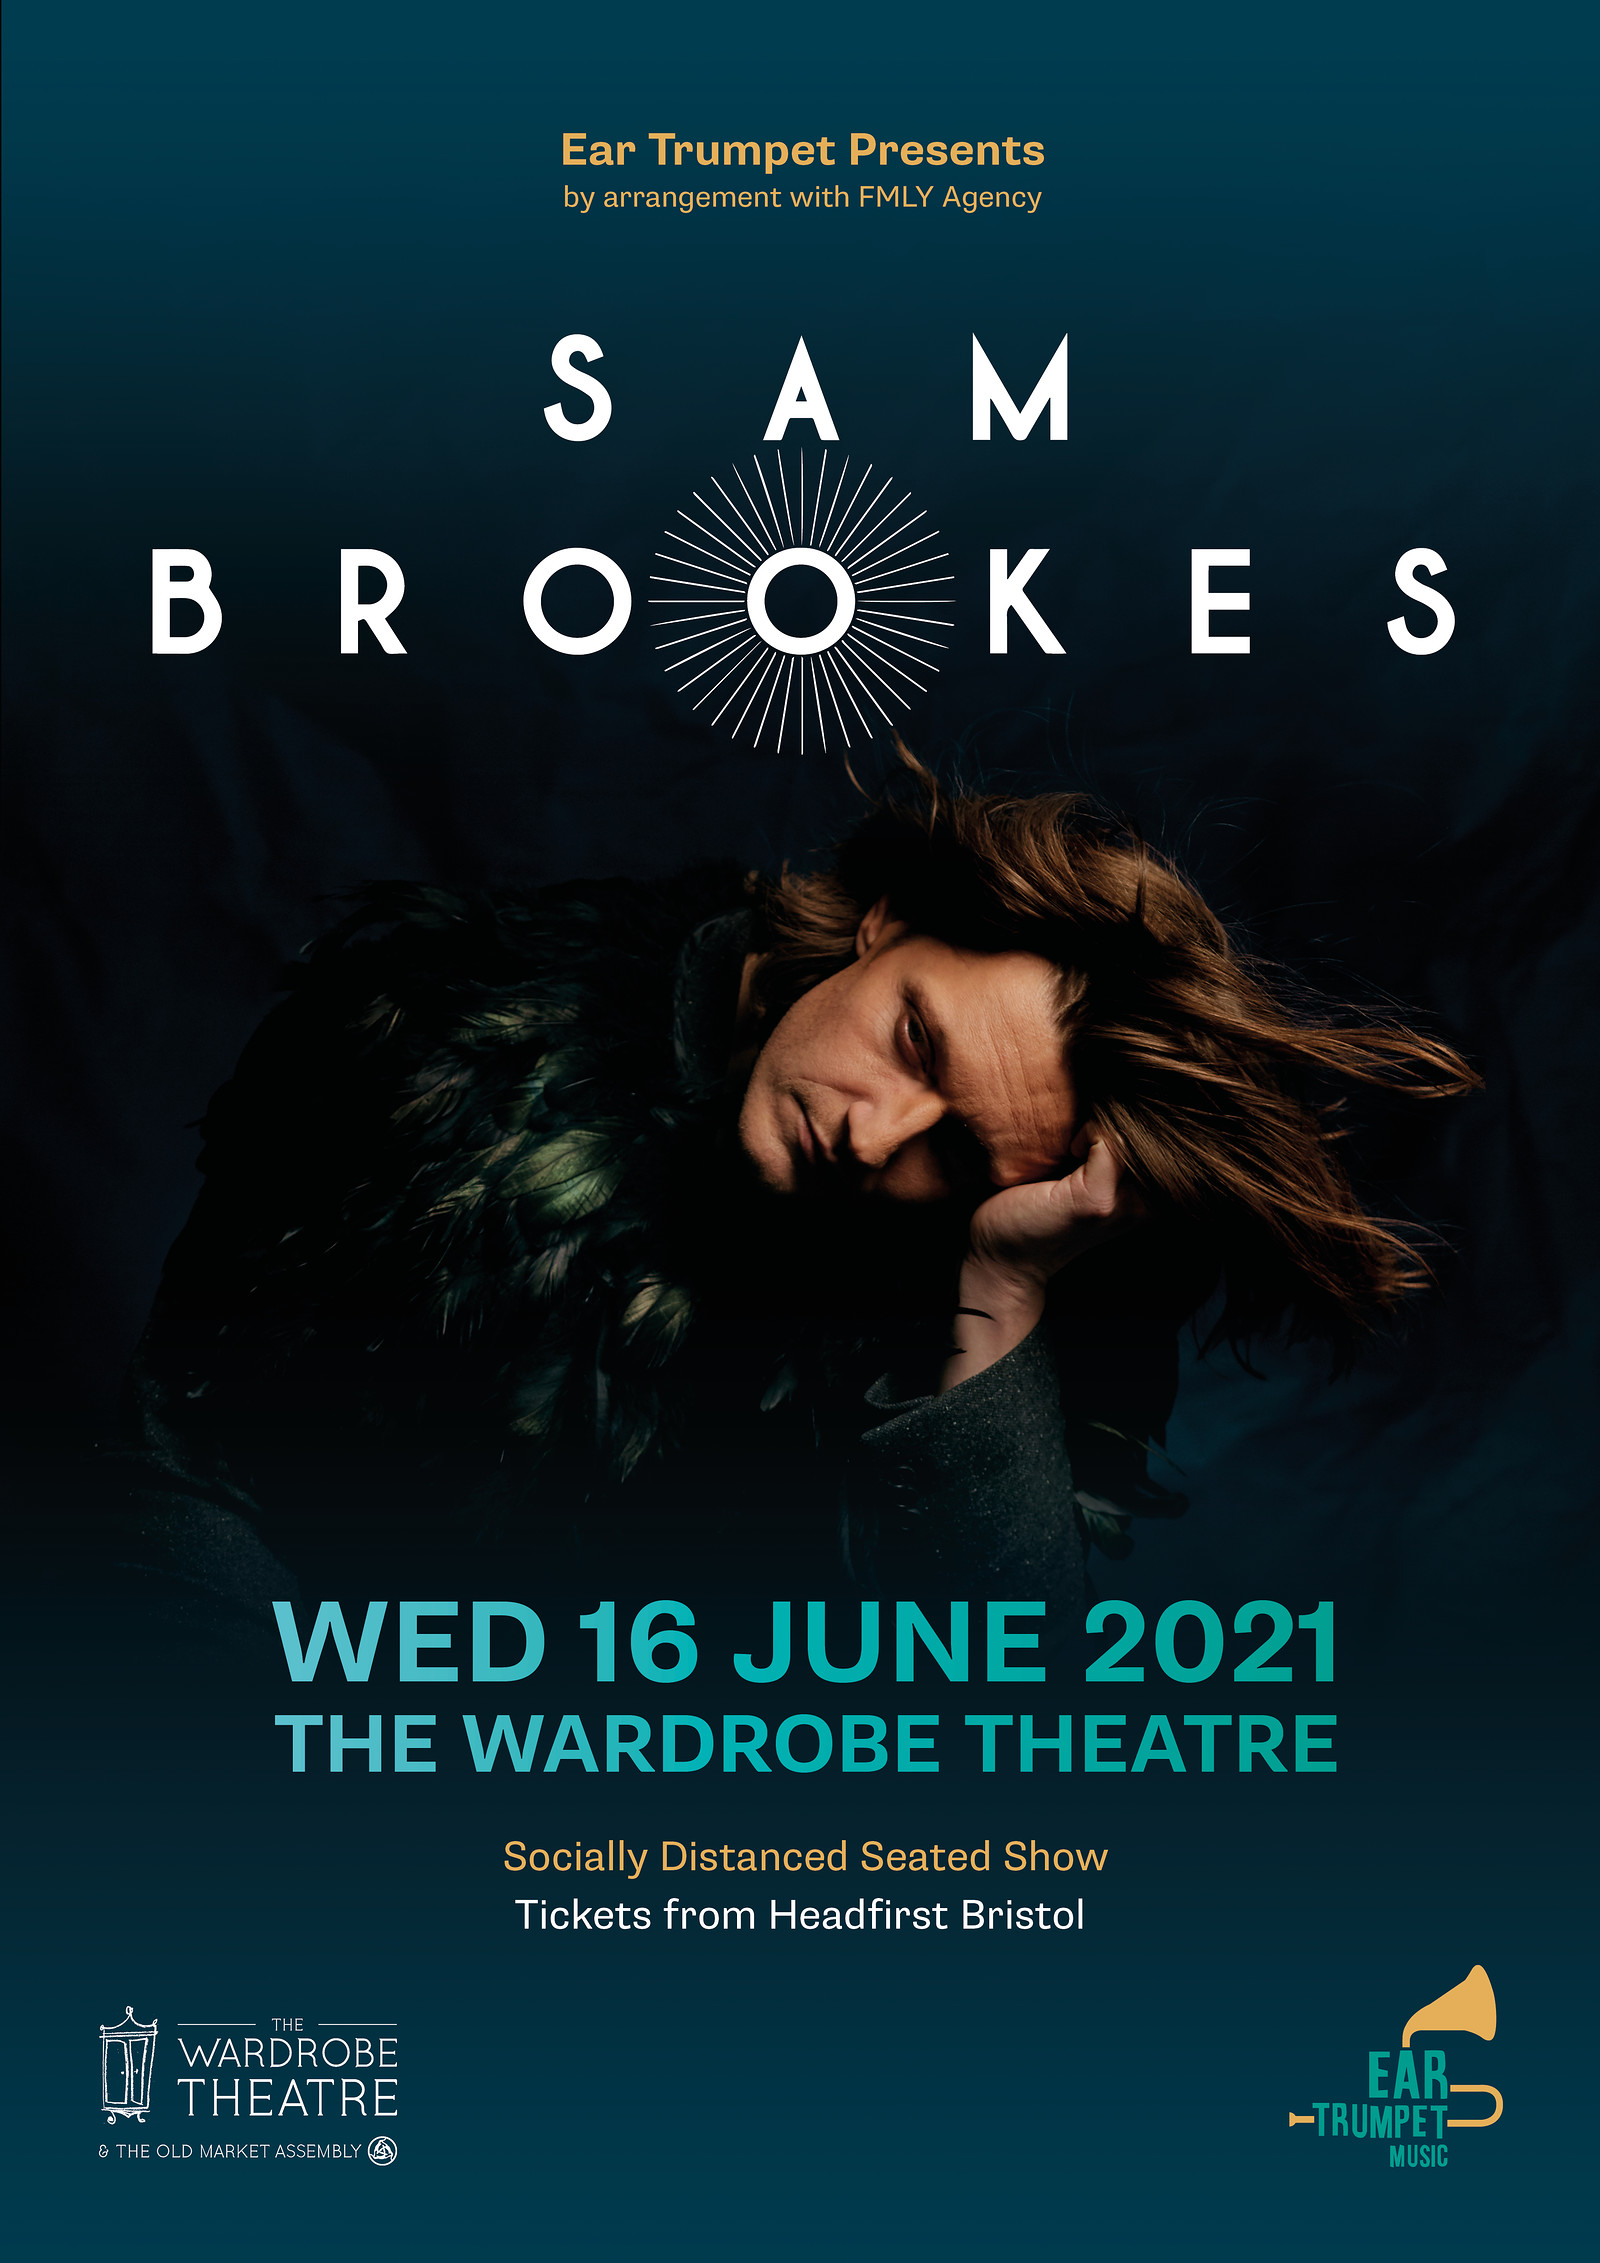 Sam Brookes Special Socially Distanced Show at The Wardrobe Theatre